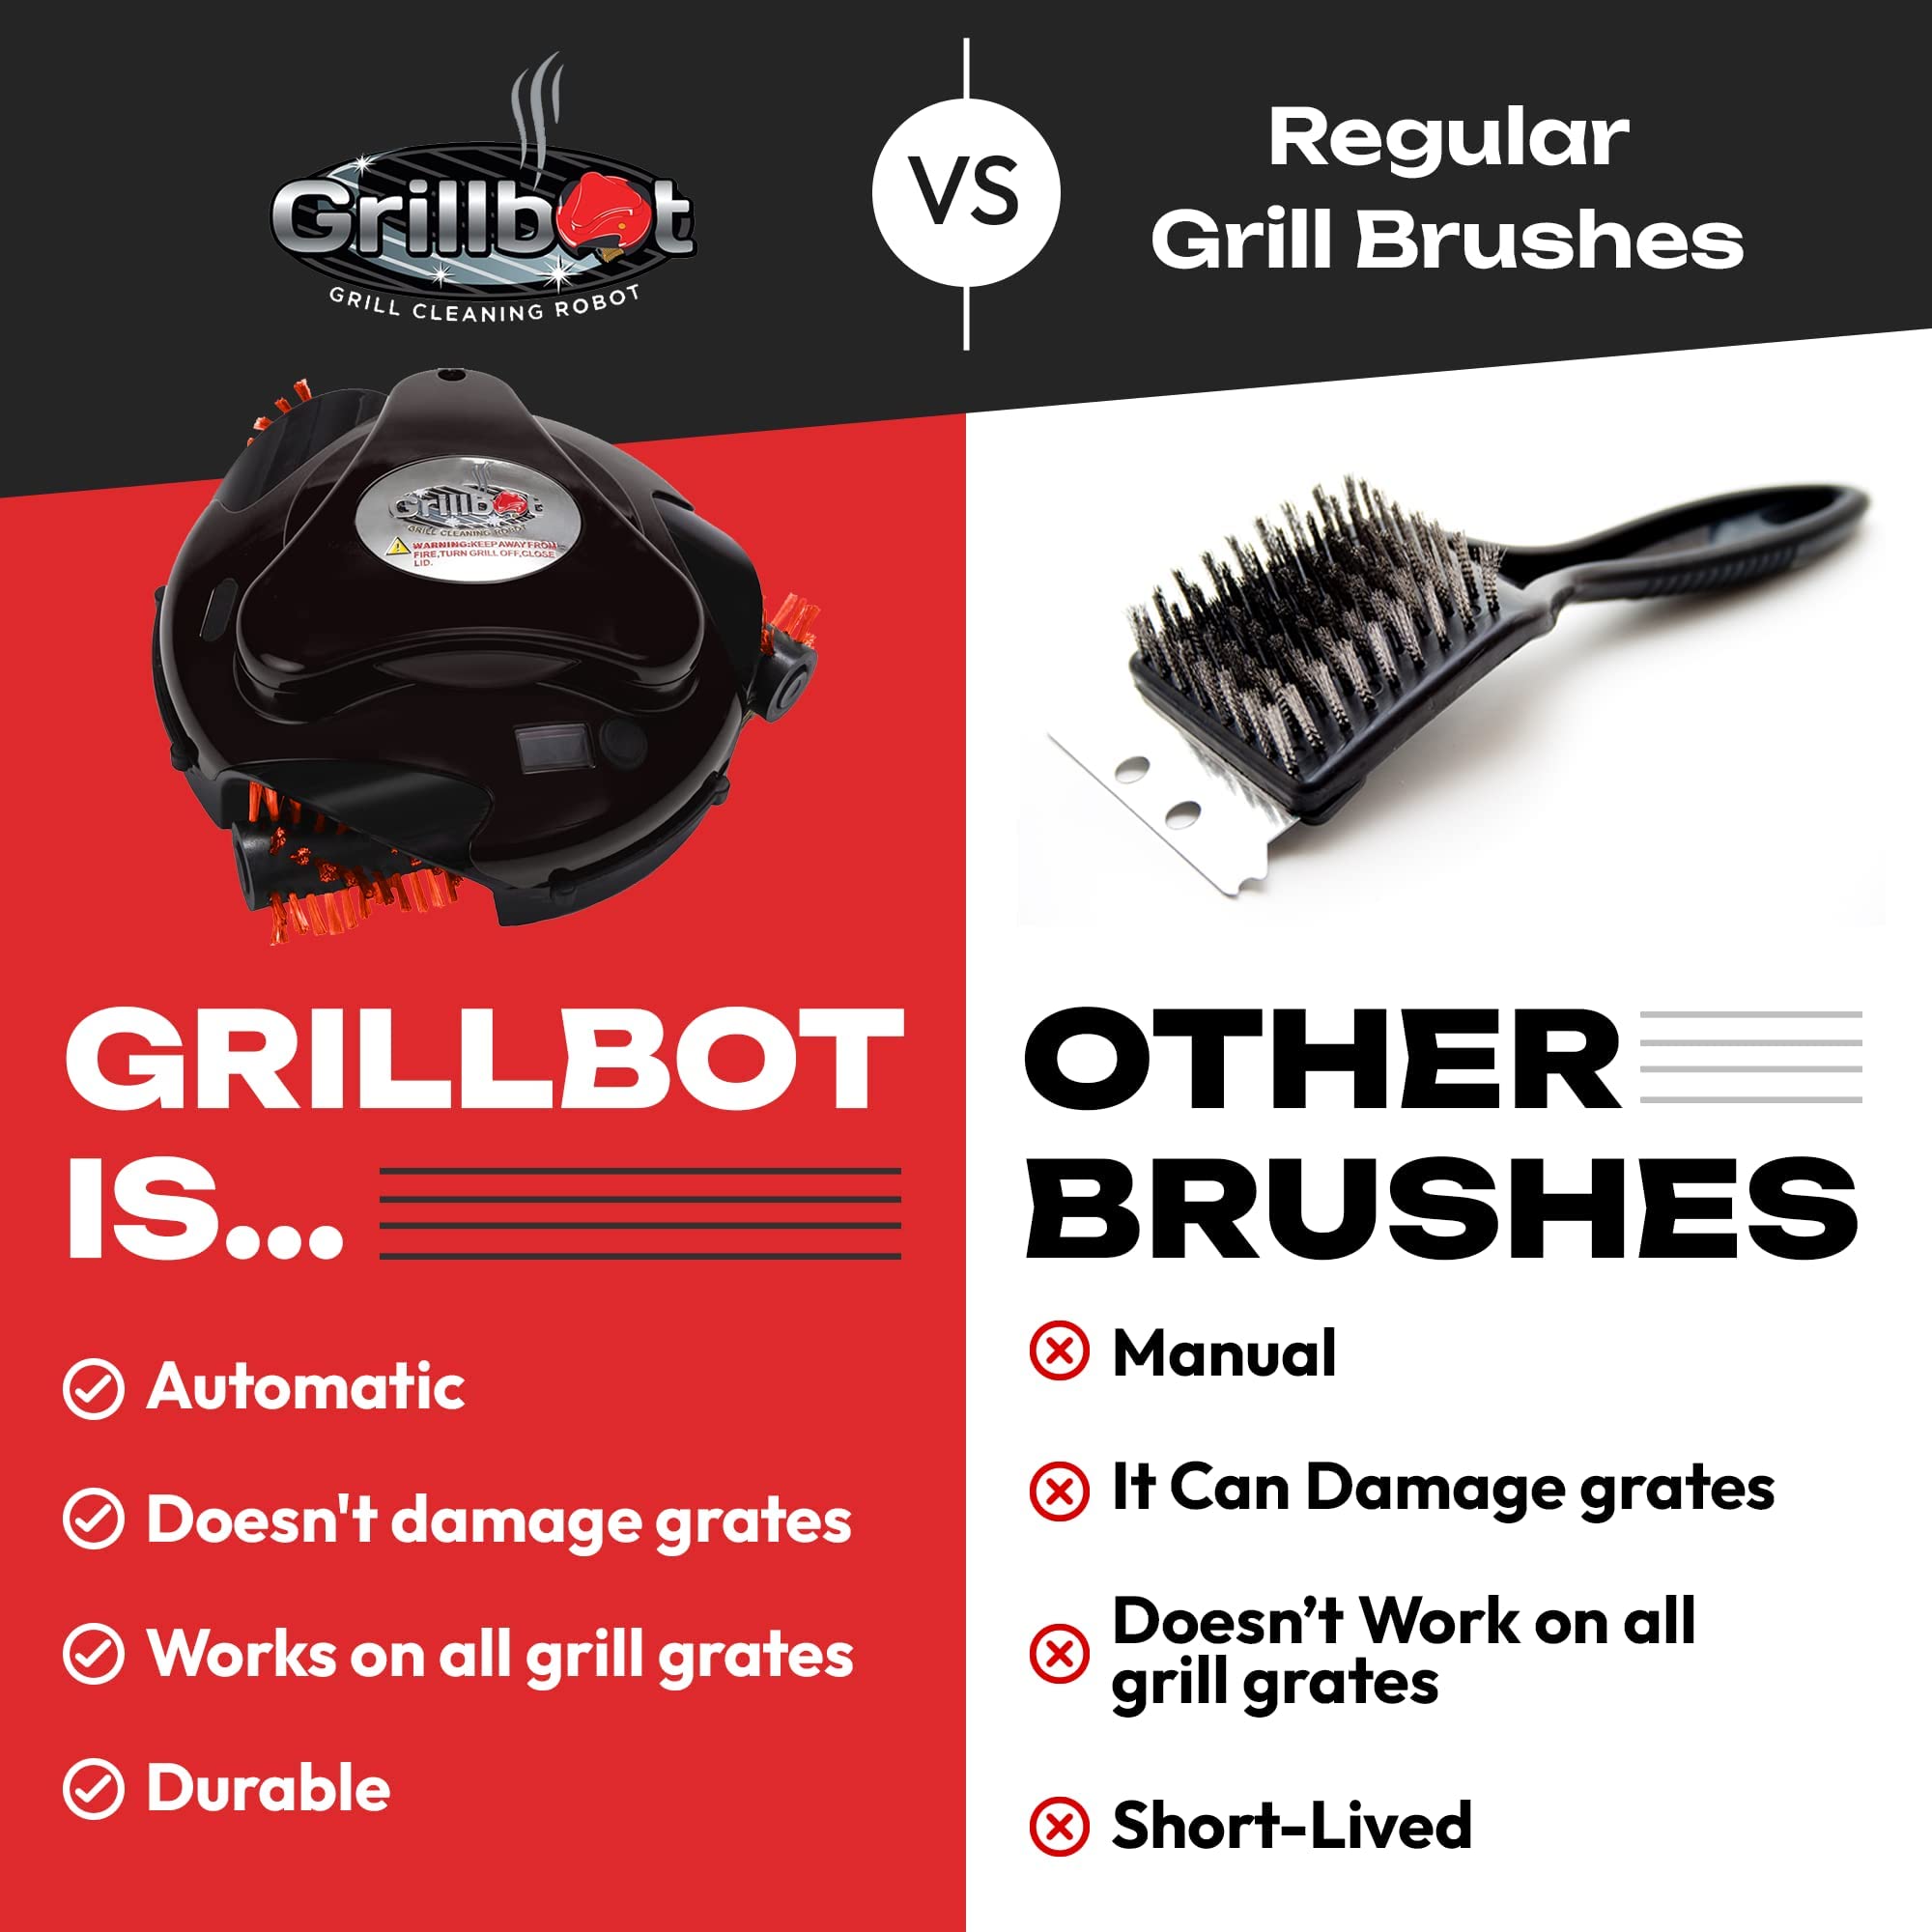 Grillbot Automatic Grill Cleaning Robot with Nylon Brushes (Black) - image 3 of 7